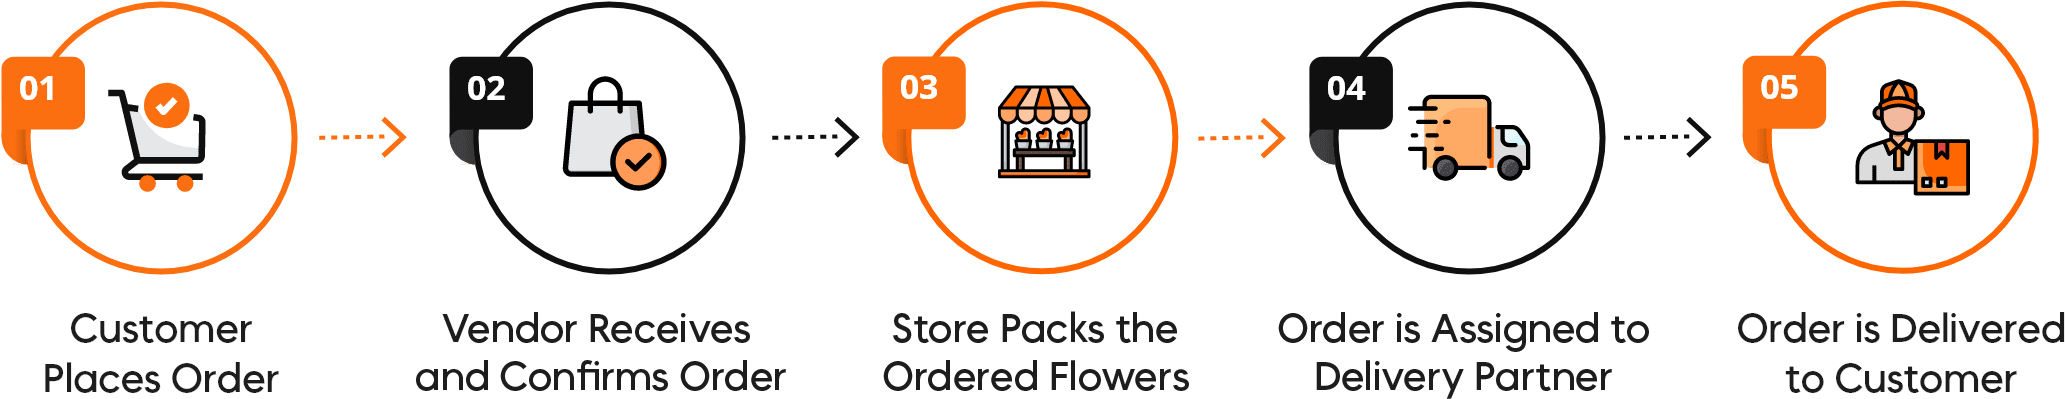 on demand Flower Delivery workflow